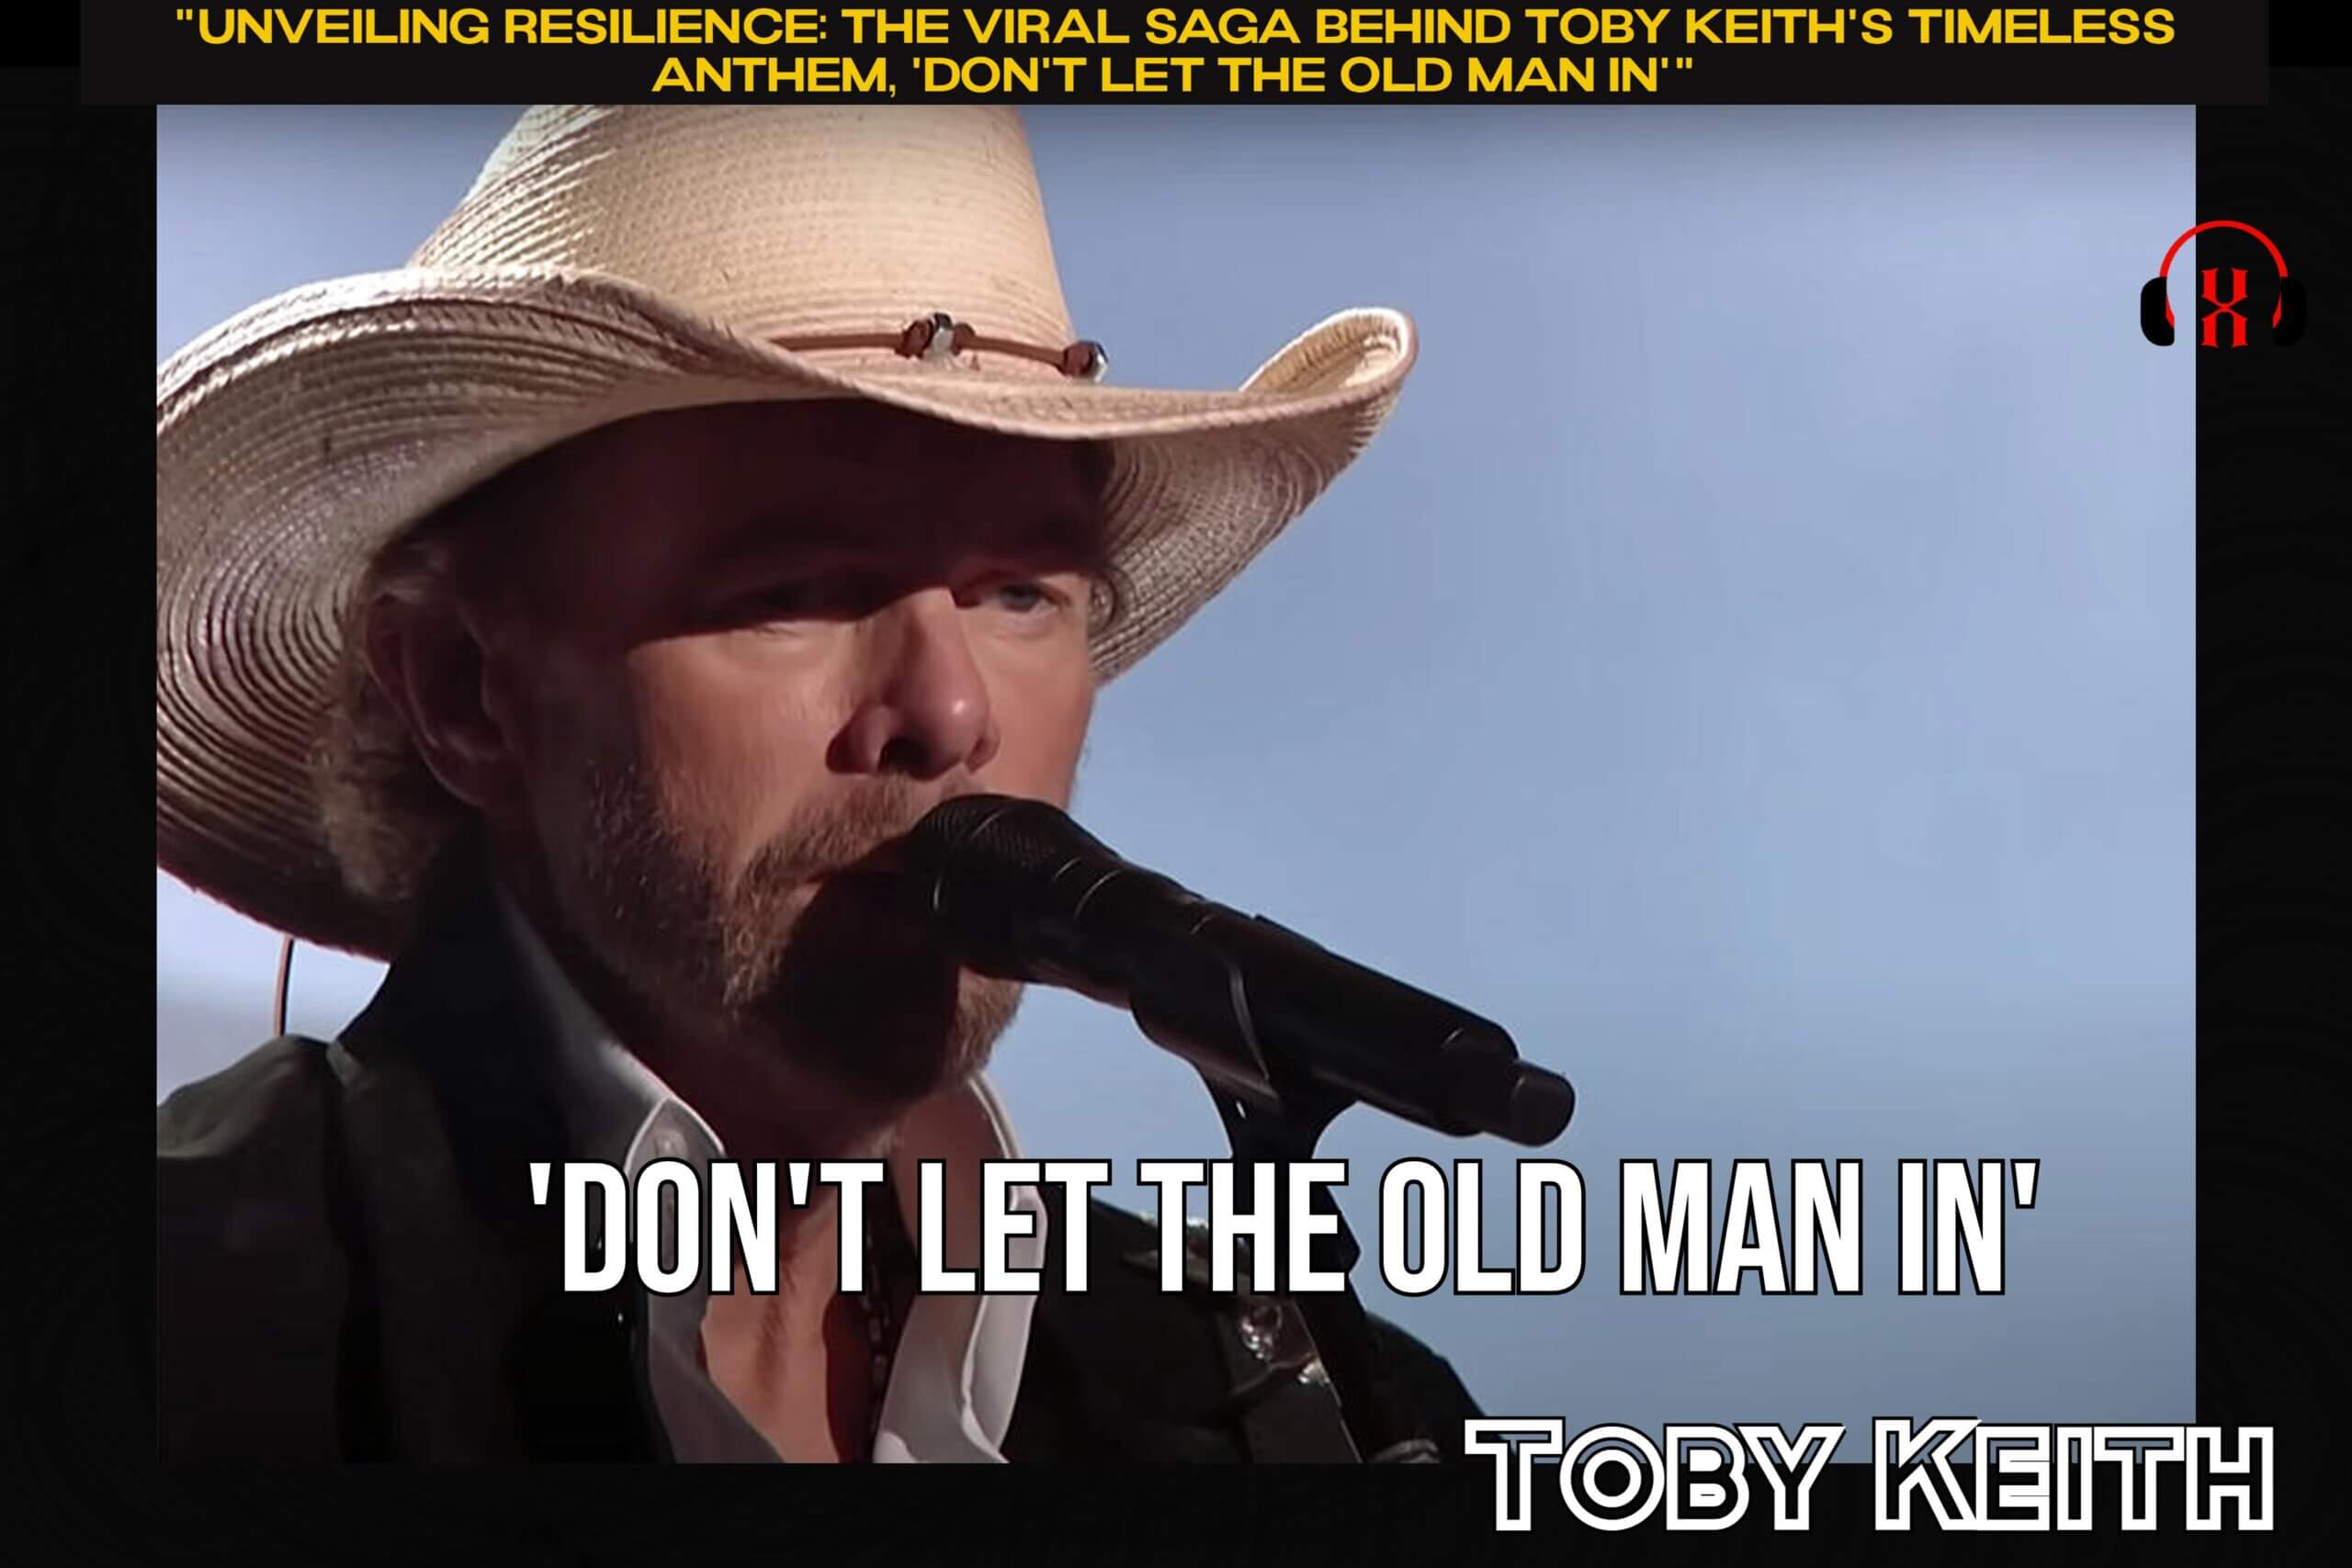 “Unveiling Resilience: The Viral Saga Behind Toby Keith’s Timeless Anthem, ‘Don’t Let the Old Man In'”